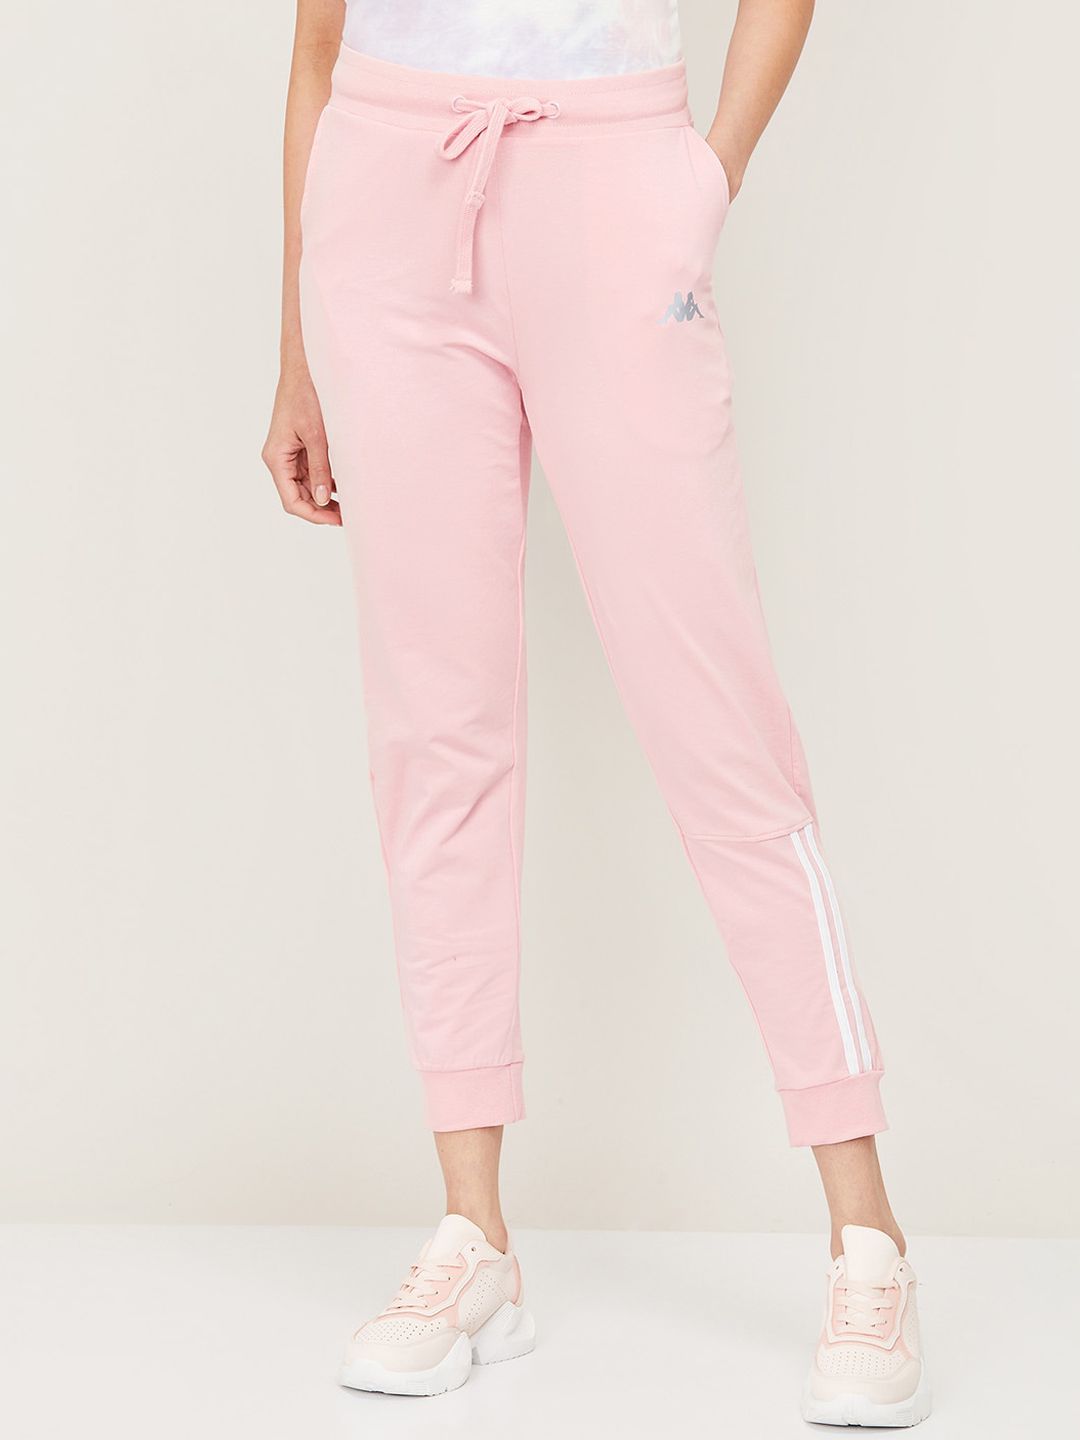 Kappa Women Pink Solid Pure Cotton Slim Fit Joggers Price in India